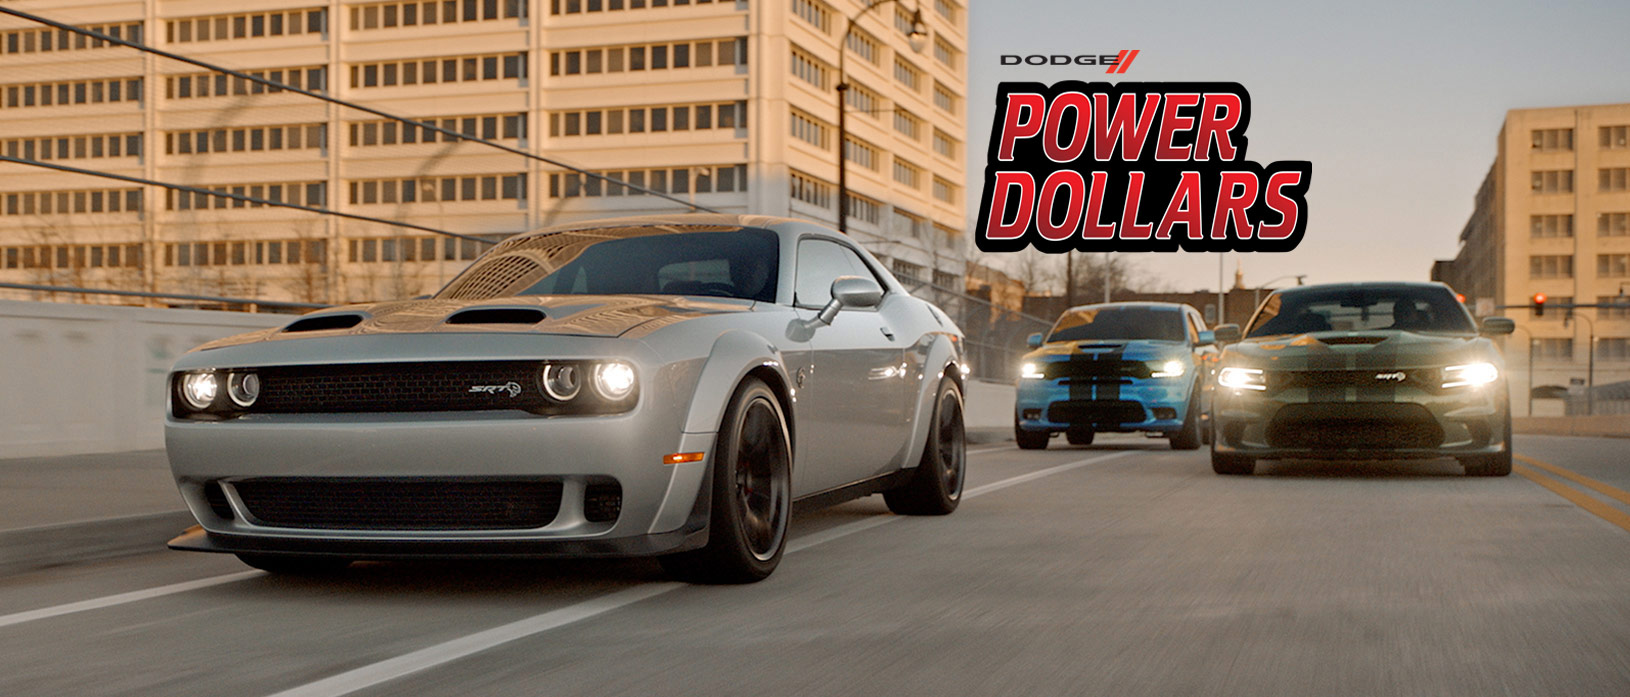 Dodge//SRT<sup>®</sup> Launches ‘Dodge Power Dollars’, Rewards Enthusiasts Who Want More Power